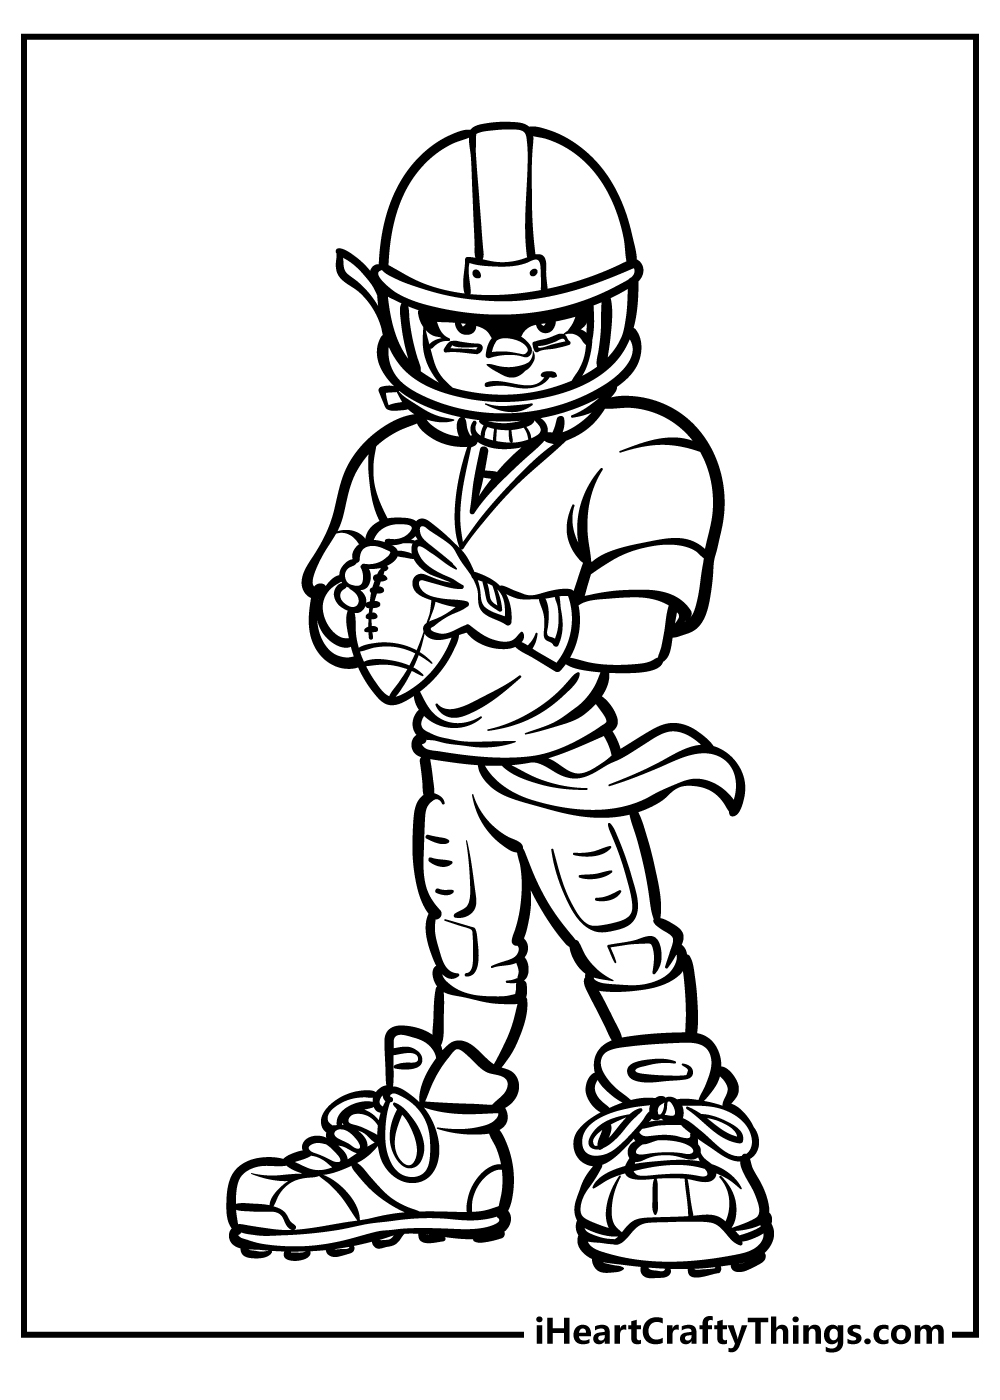 Football Easy Coloring Pages